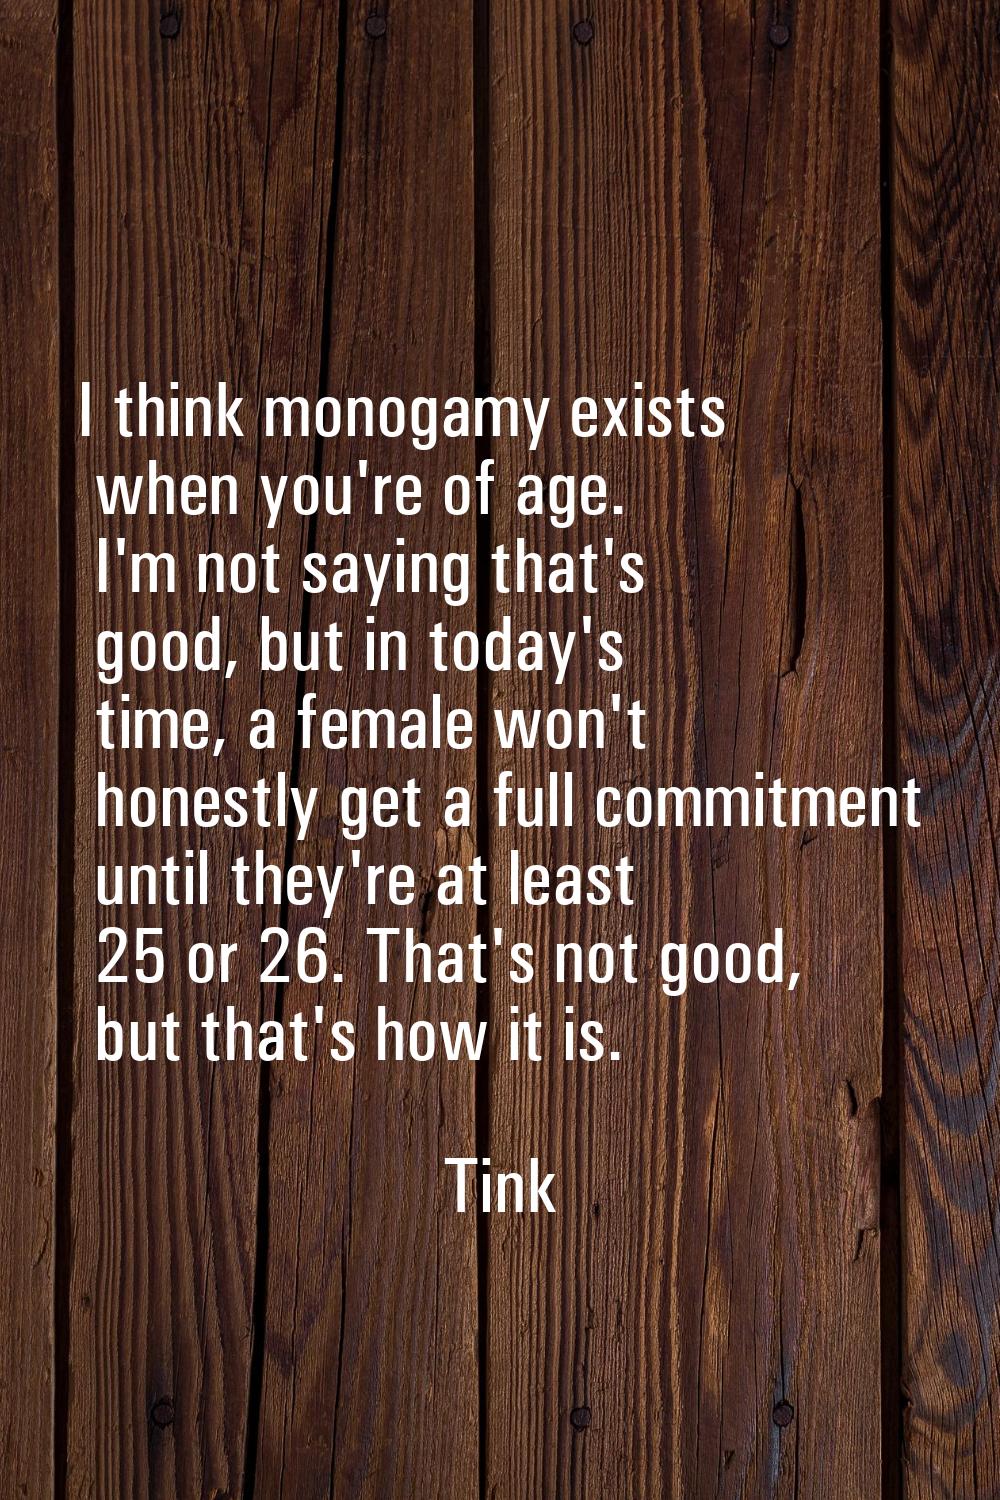 I think monogamy exists when you're of age. I'm not saying that's good, but in today's time, a fema